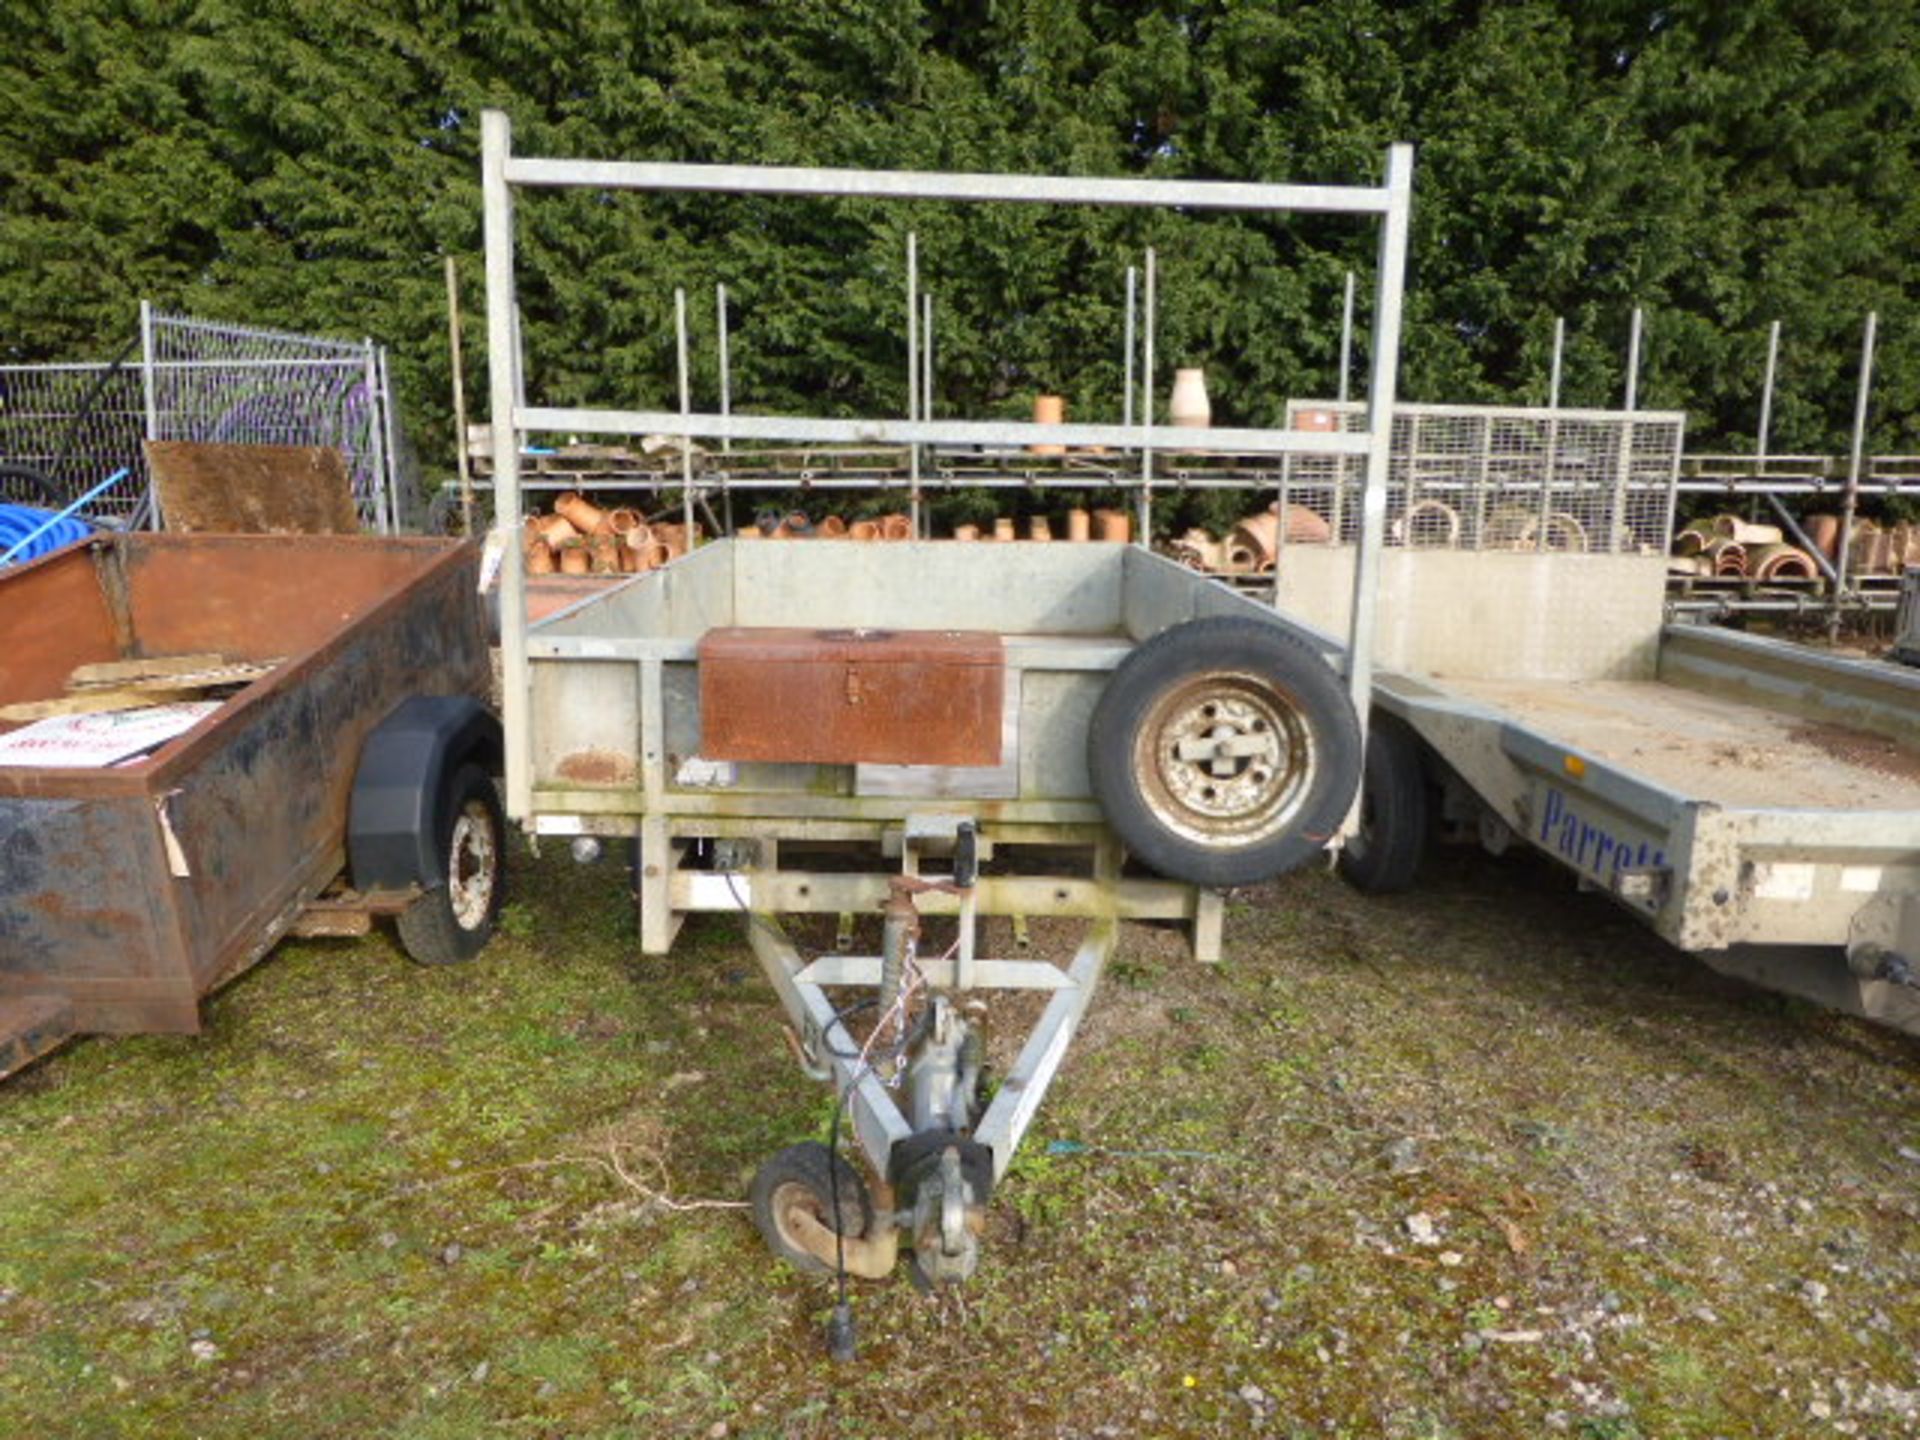 Ifor Williams Type LM105GHD 3m twin axle galvanized drop side trailer capacity 3500kg Serial